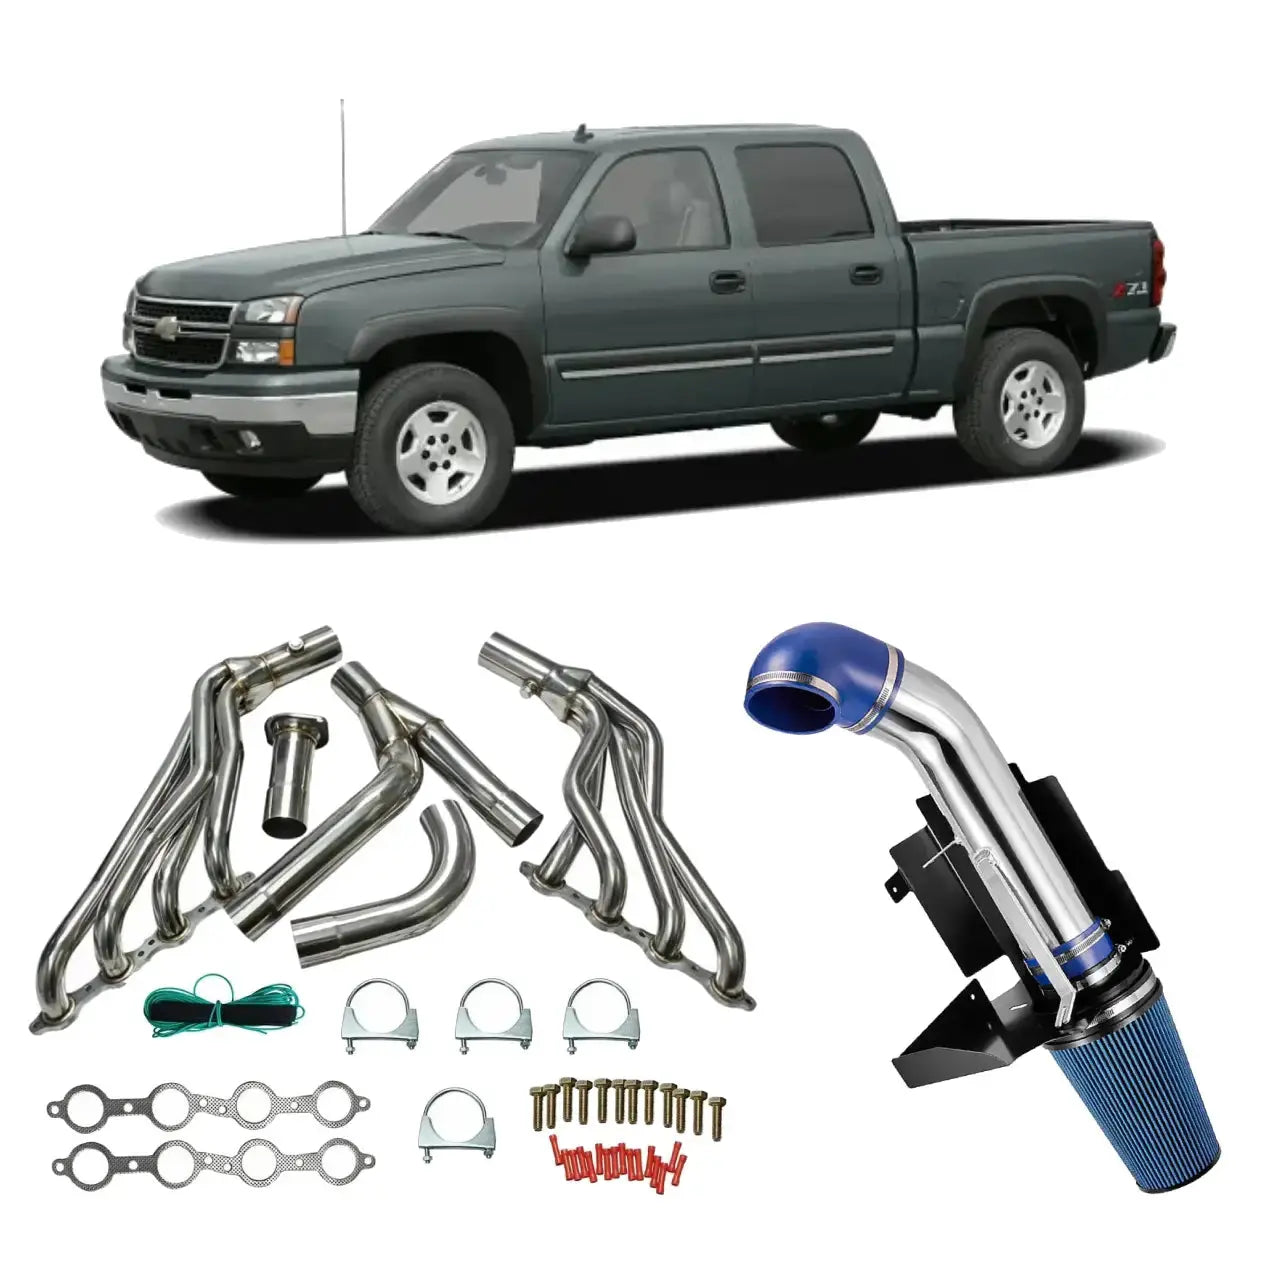 Exhaust Header/4" Cold Air Intake Kit All-In-One Kit for 1999-2006 Chevy/GMC GMT800 Silverado/Sierra/Avalanche 1500 Y-Pipe 2WD 4.8L 5.3L 6.0L Flashark